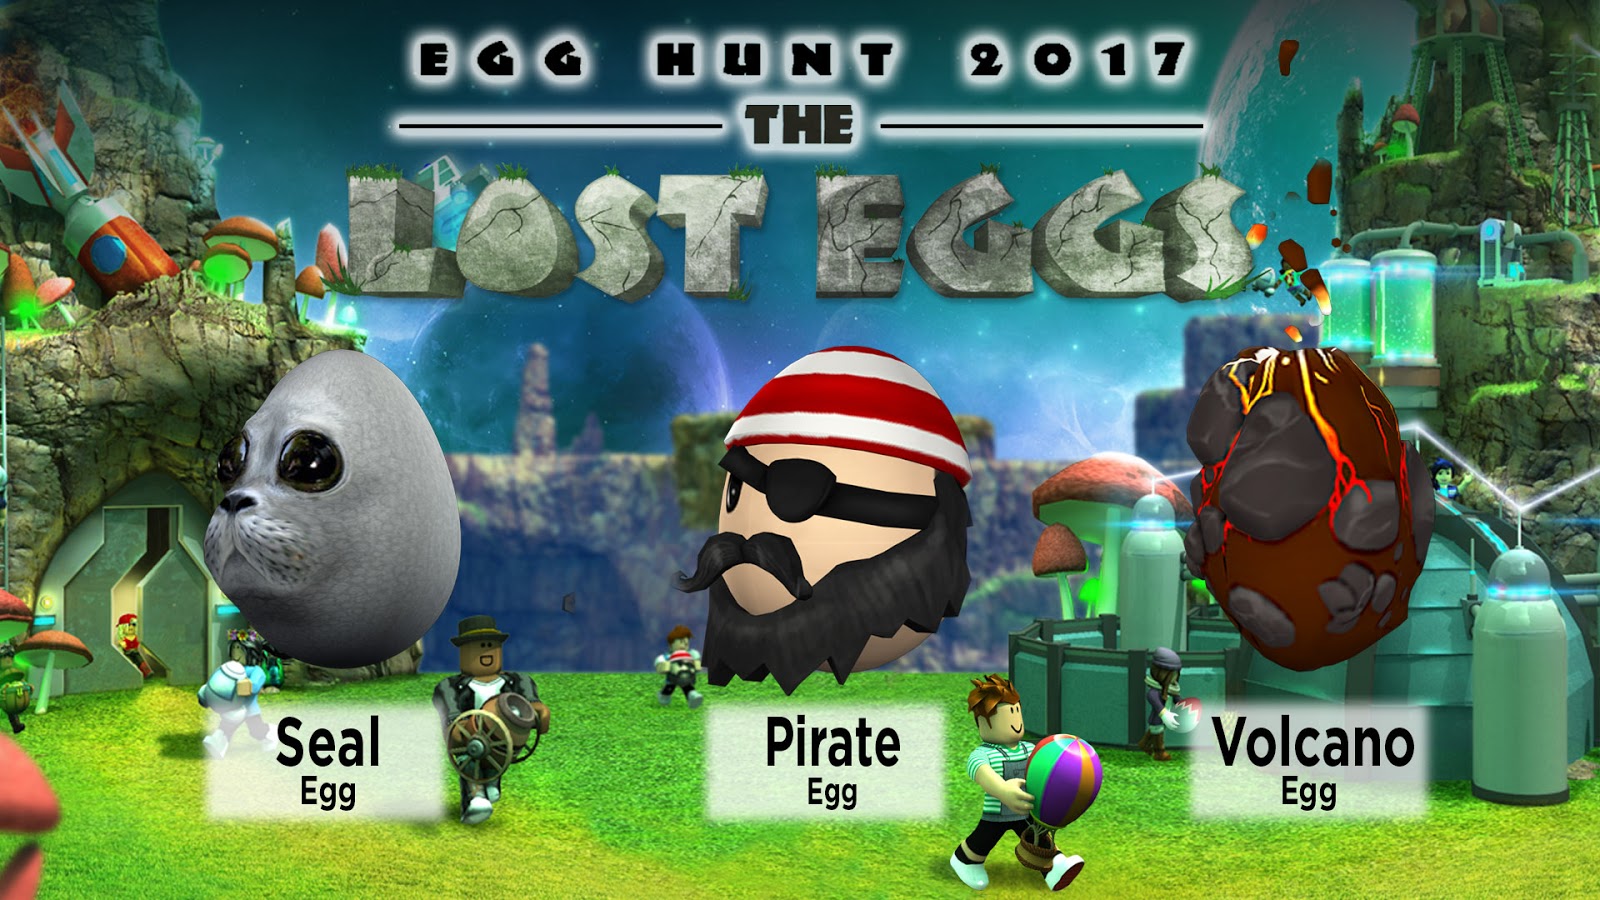 Giveaway Roblox Egg Hunt Prize Pack Mommy Katie - bacon hair with flying pig gets to sky lands part 1 roblox